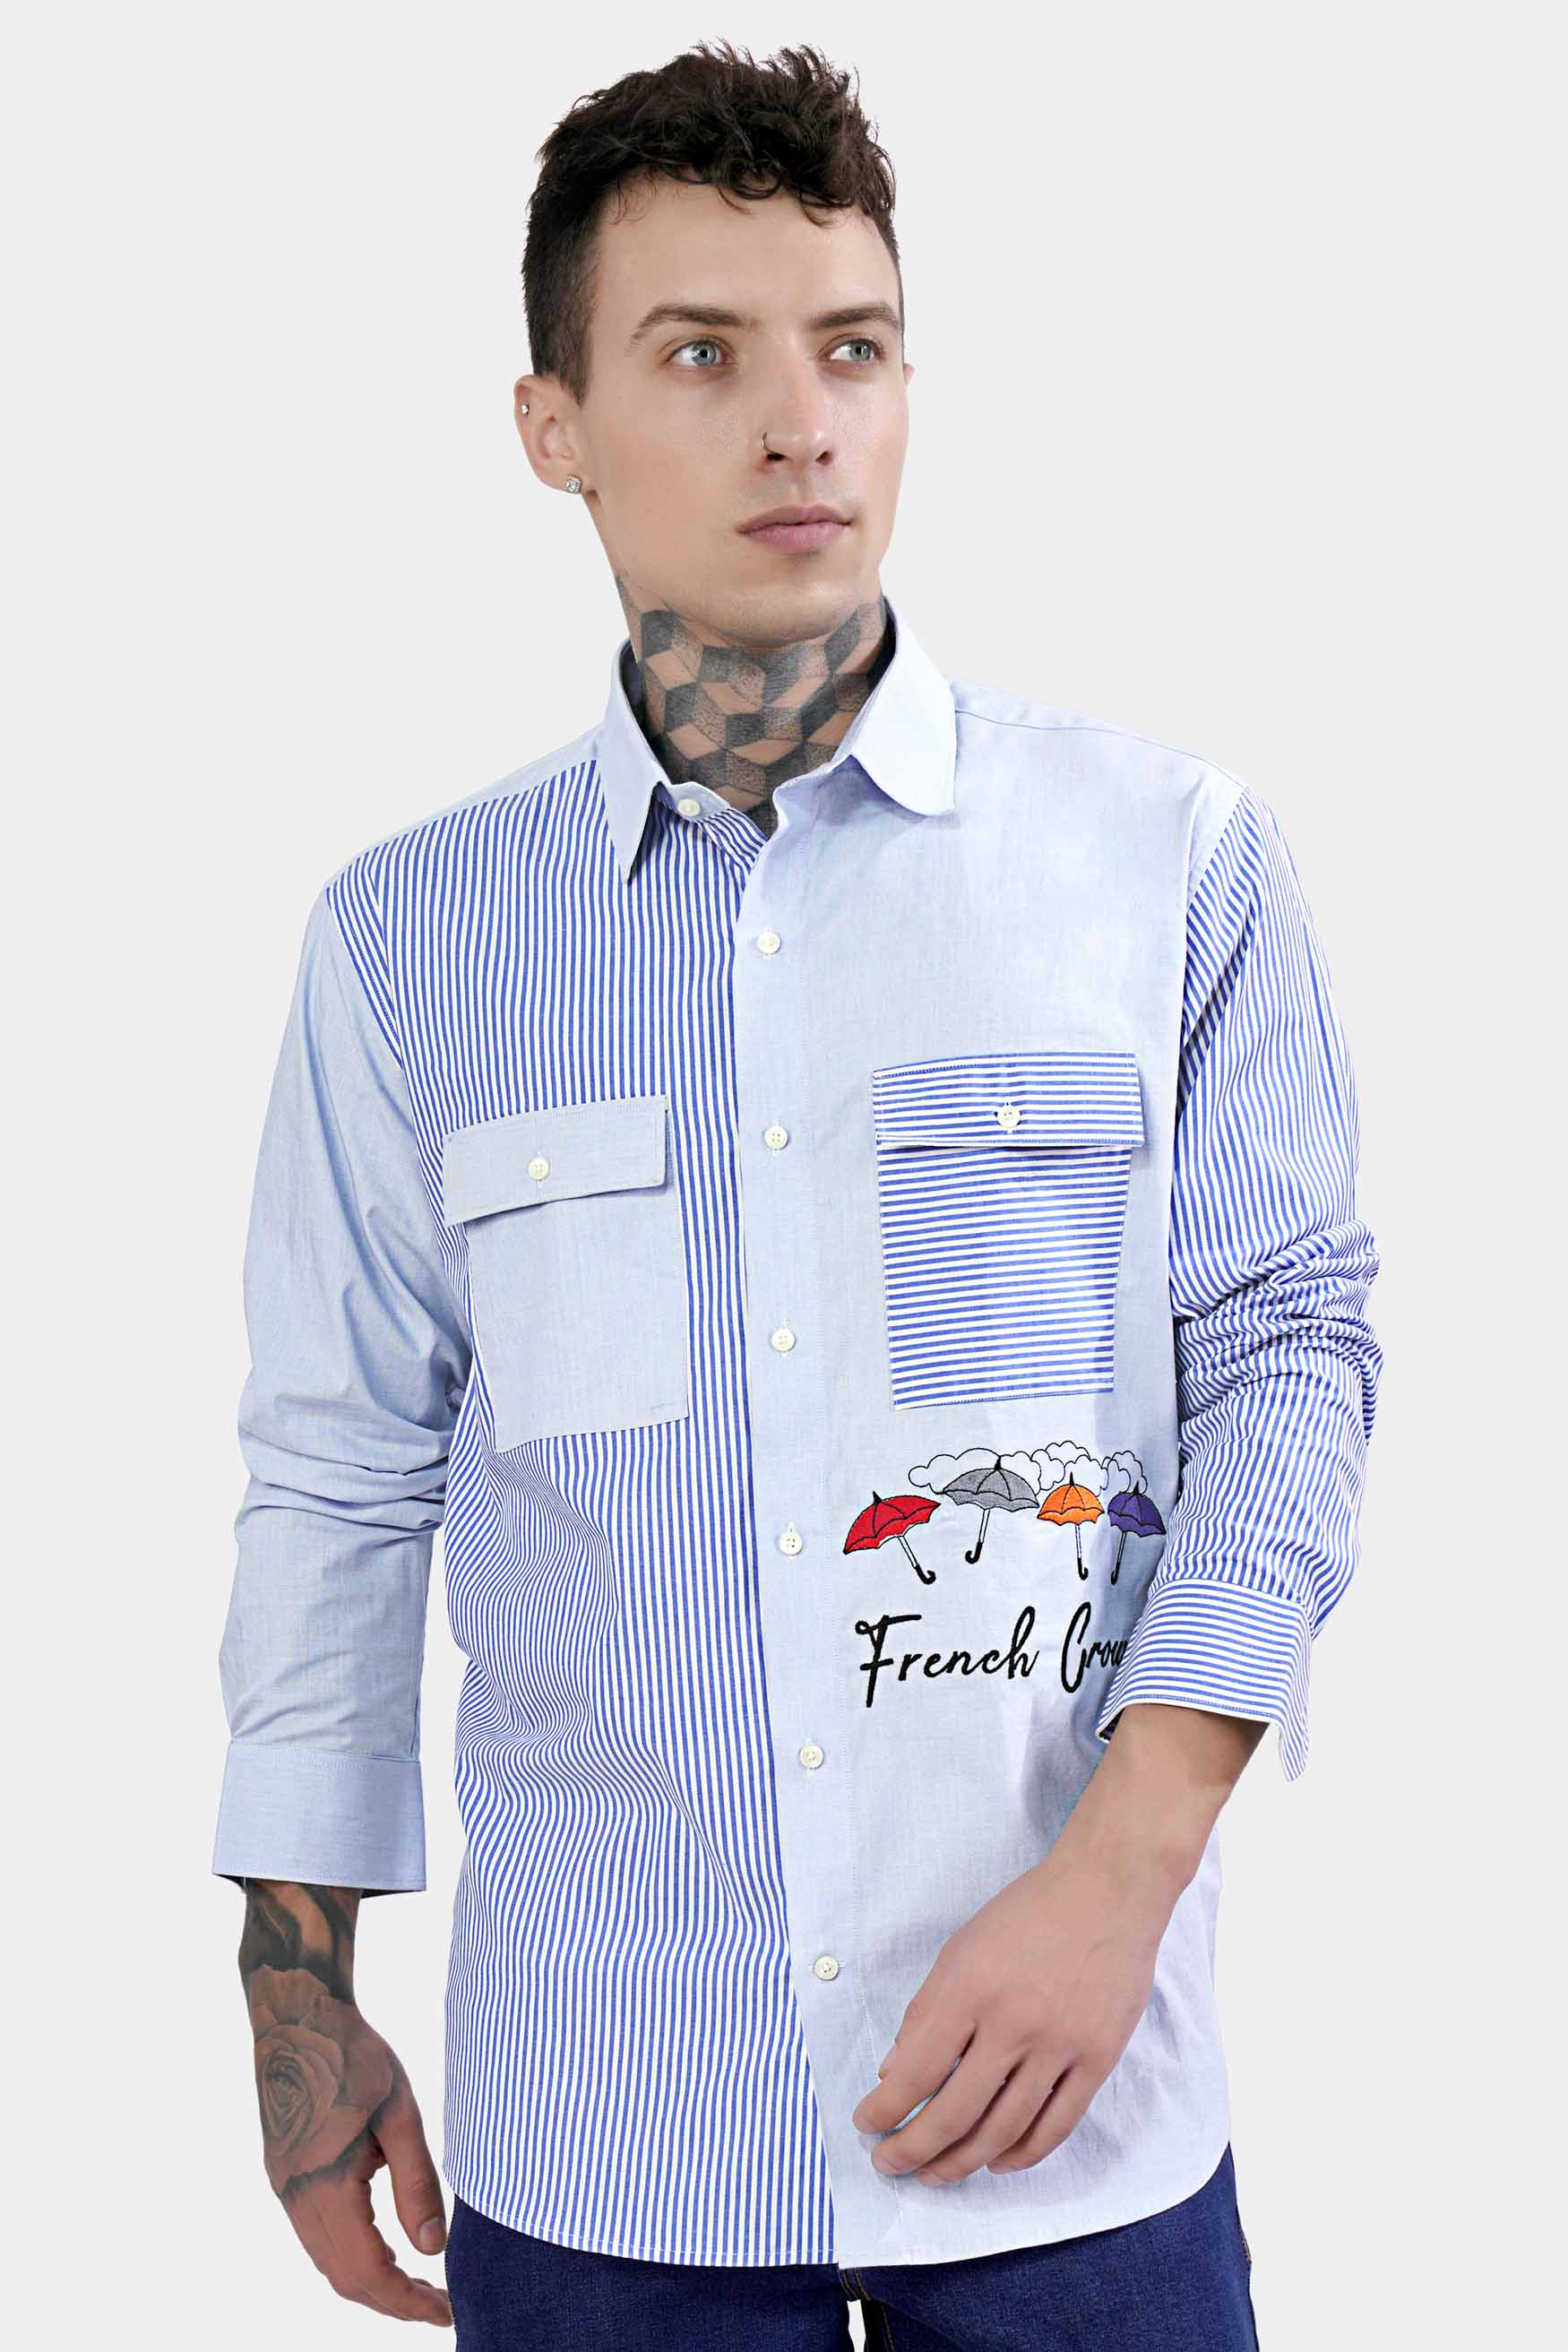 Hawkes Gray and Perano Blue Striped with Brand Name Embroidered Premium Cotton Designer Shirt 8267-P147-E276-38, 8267-P147-E276-H-38, 8267-P147-E276-39, 8267-P147-E276-H-39, 8267-P147-E276-40, 8267-P147-E276-H-40, 8267-P147-E276-42, 8267-P147-E276-H-42, 8267-P147-E276-44, 8267-P147-E276-H-44, 8267-P147-E276-46, 8267-P147-E276-H-46, 8267-P147-E276-48, 8267-P147-E276-H-48, 8267-P147-E276-50, 8267-P147-E276-H-50, 8267-P147-E276-52, 8267-P147-E276-H-52